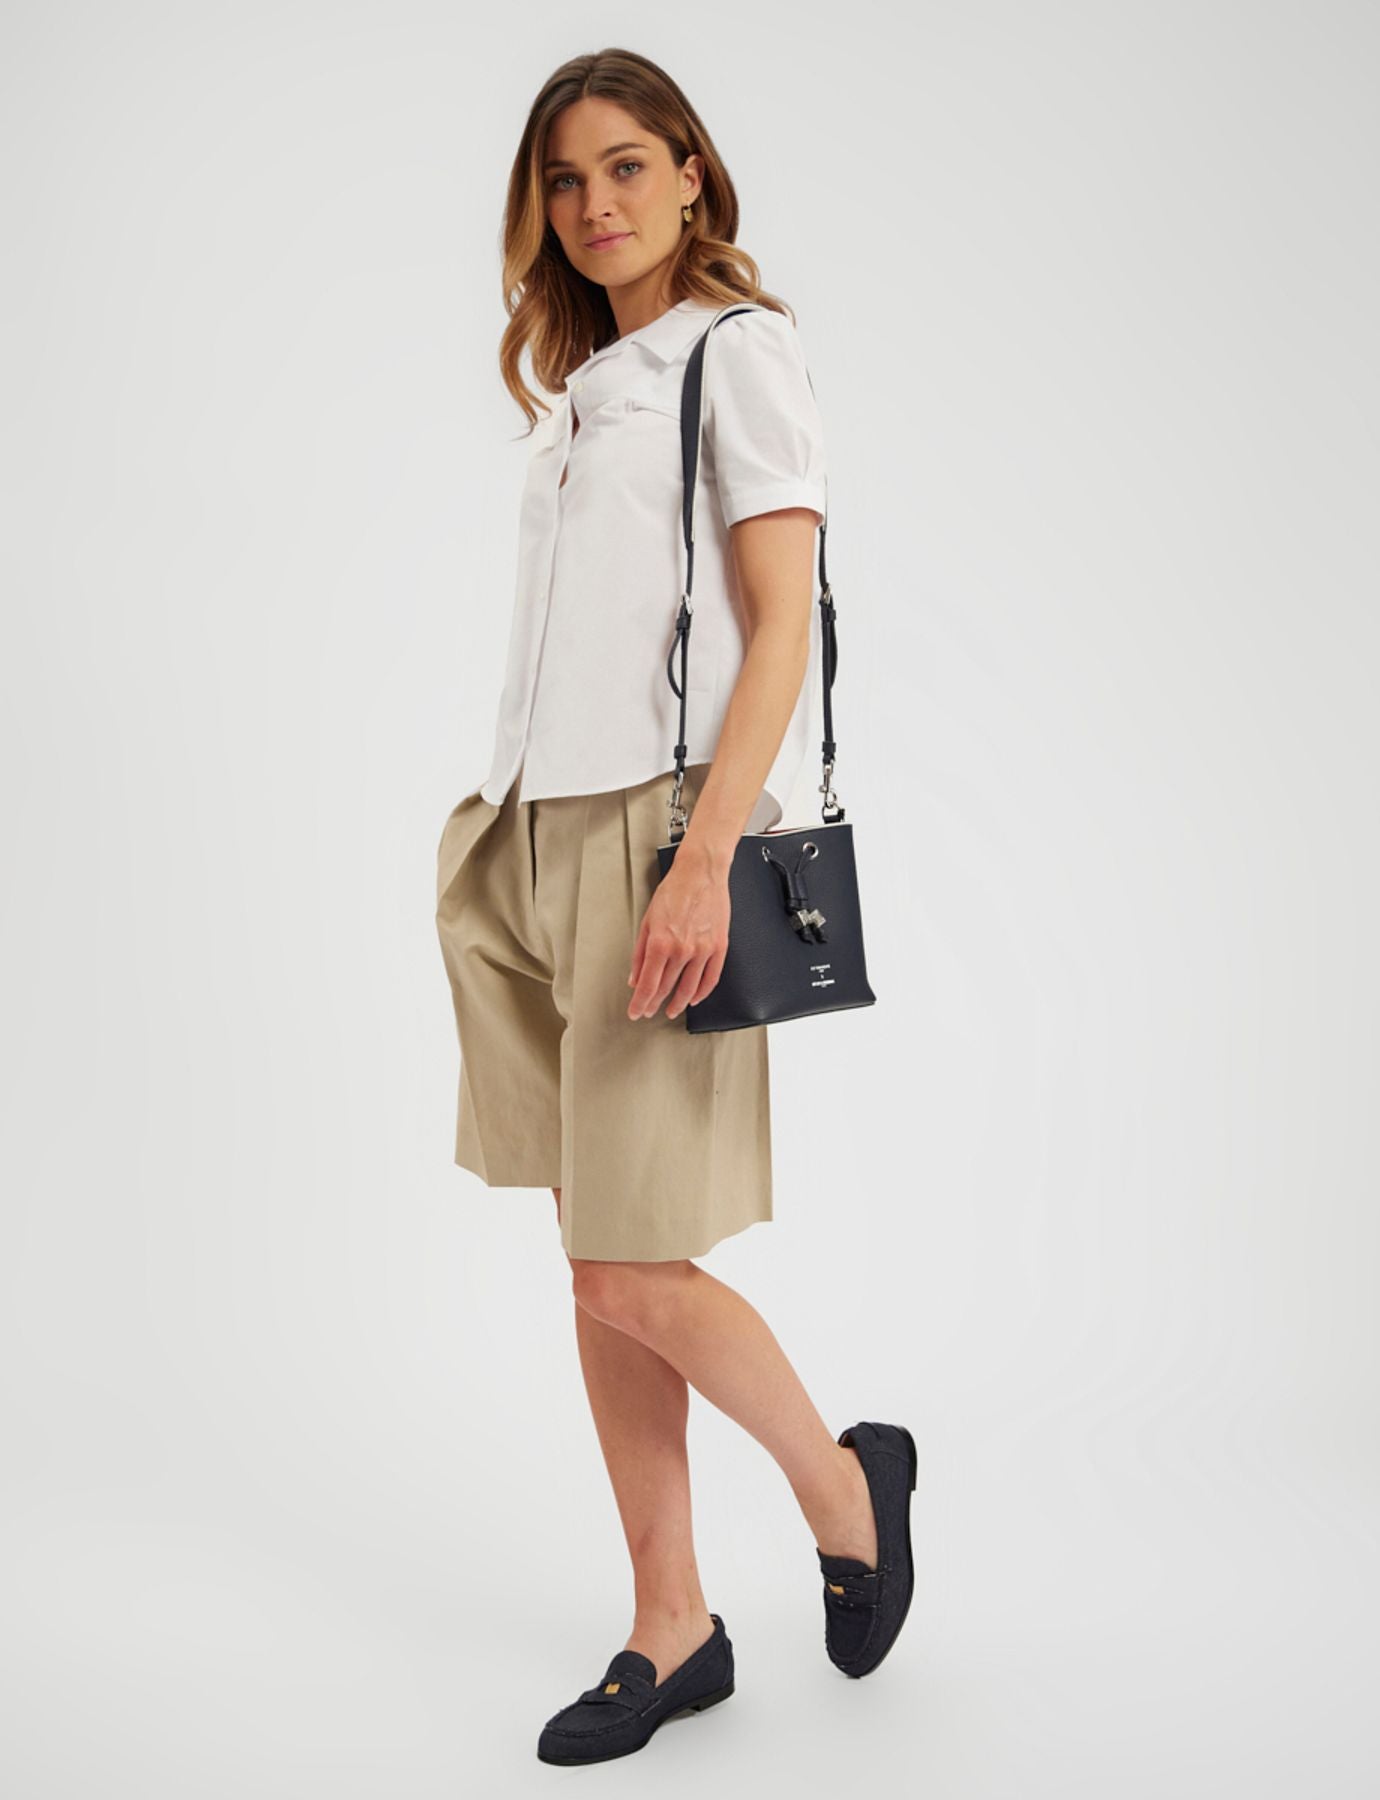 bucket-bag-small-modele-ines-le-tanneur